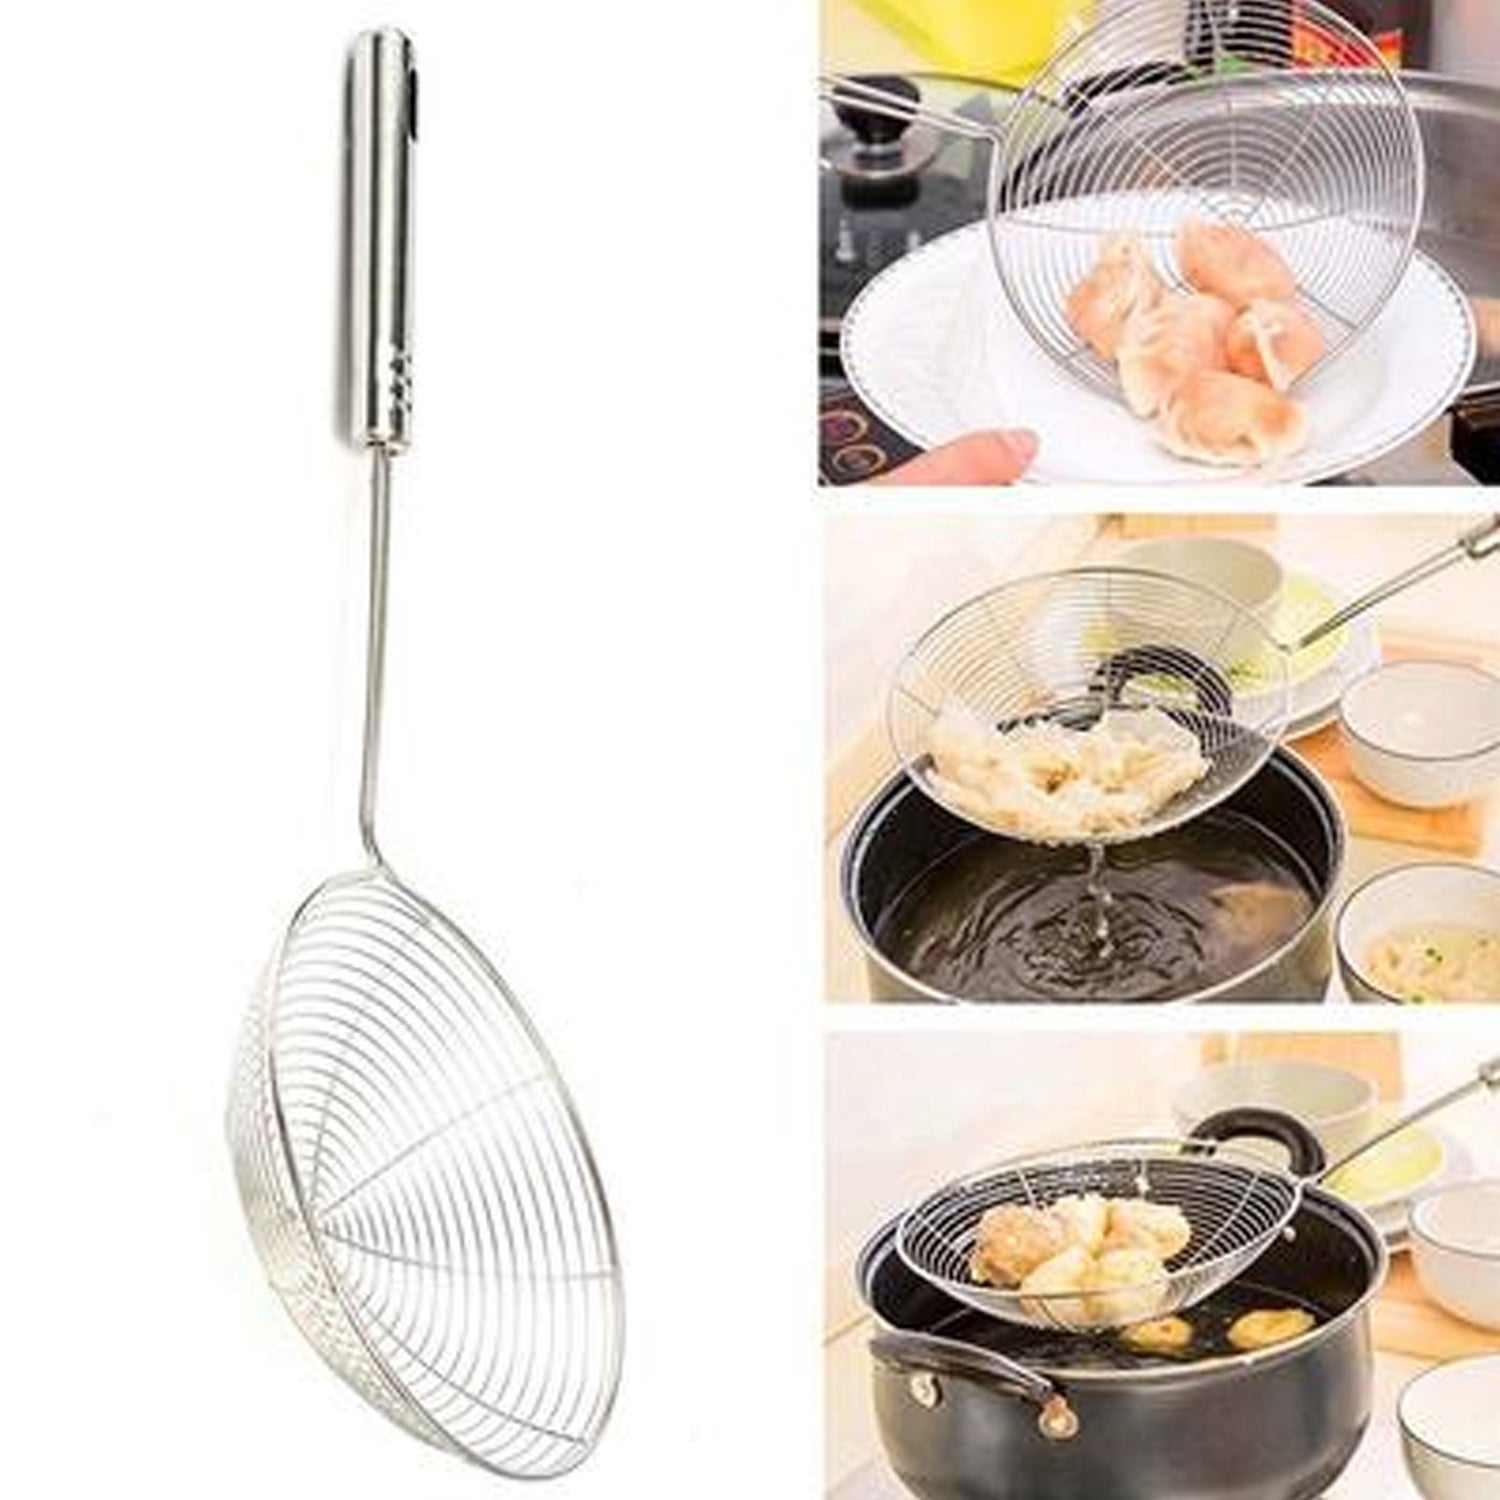 2728 Small Oil Strainer To Get Perfect Fried Food Stuffs Easily Without Any Problem And Damage.